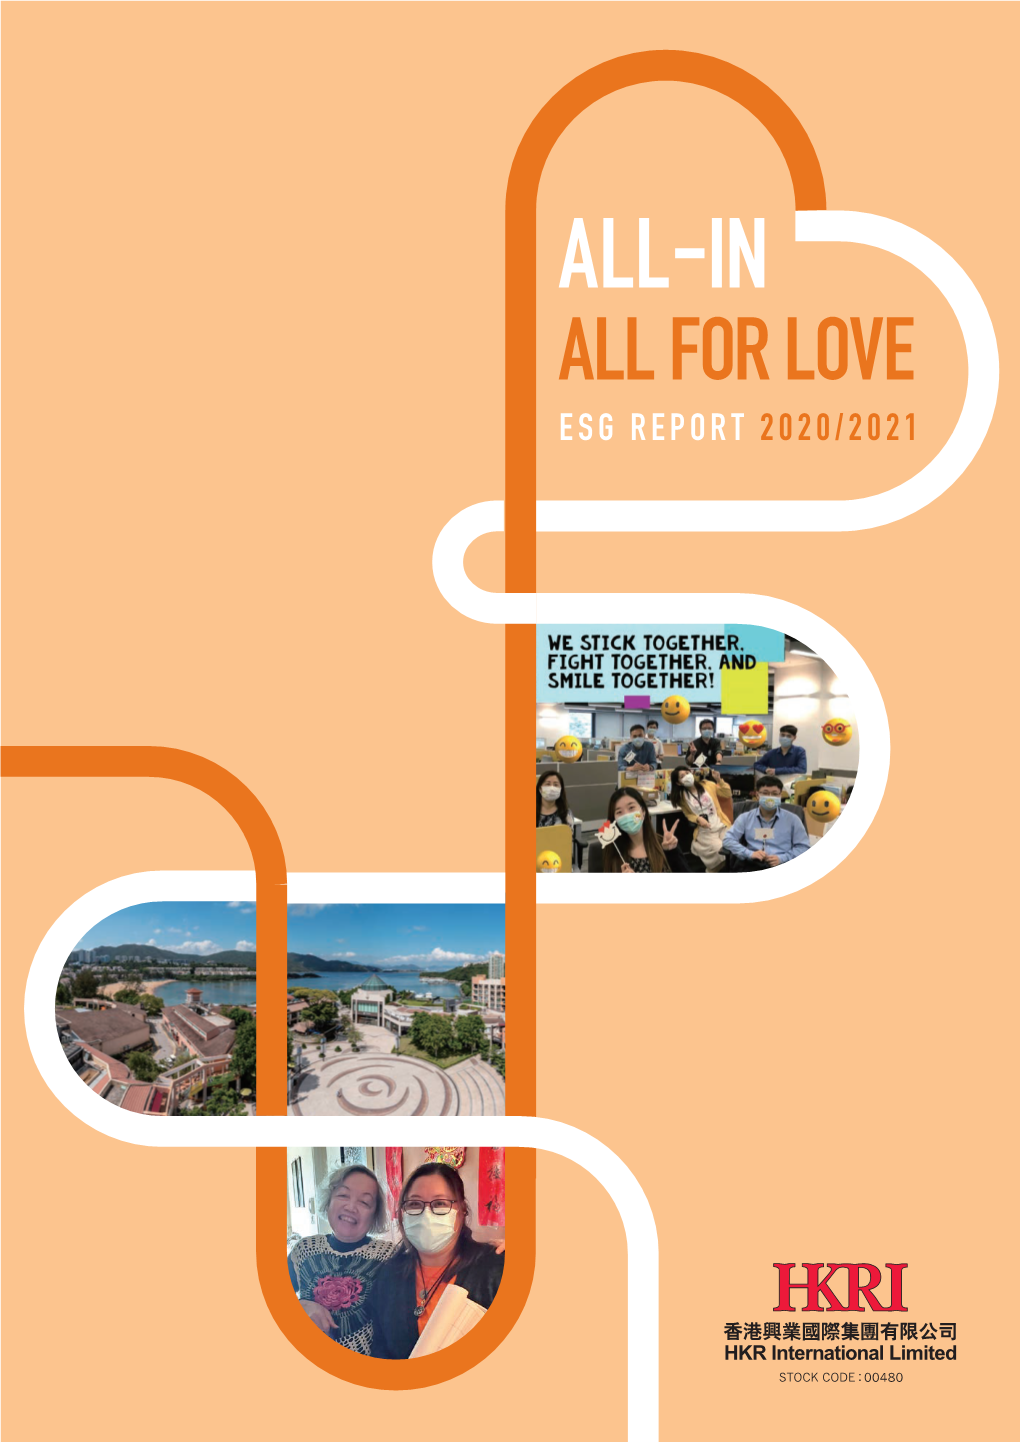 All-In All for Love Esg Report 2020/2021 Contents